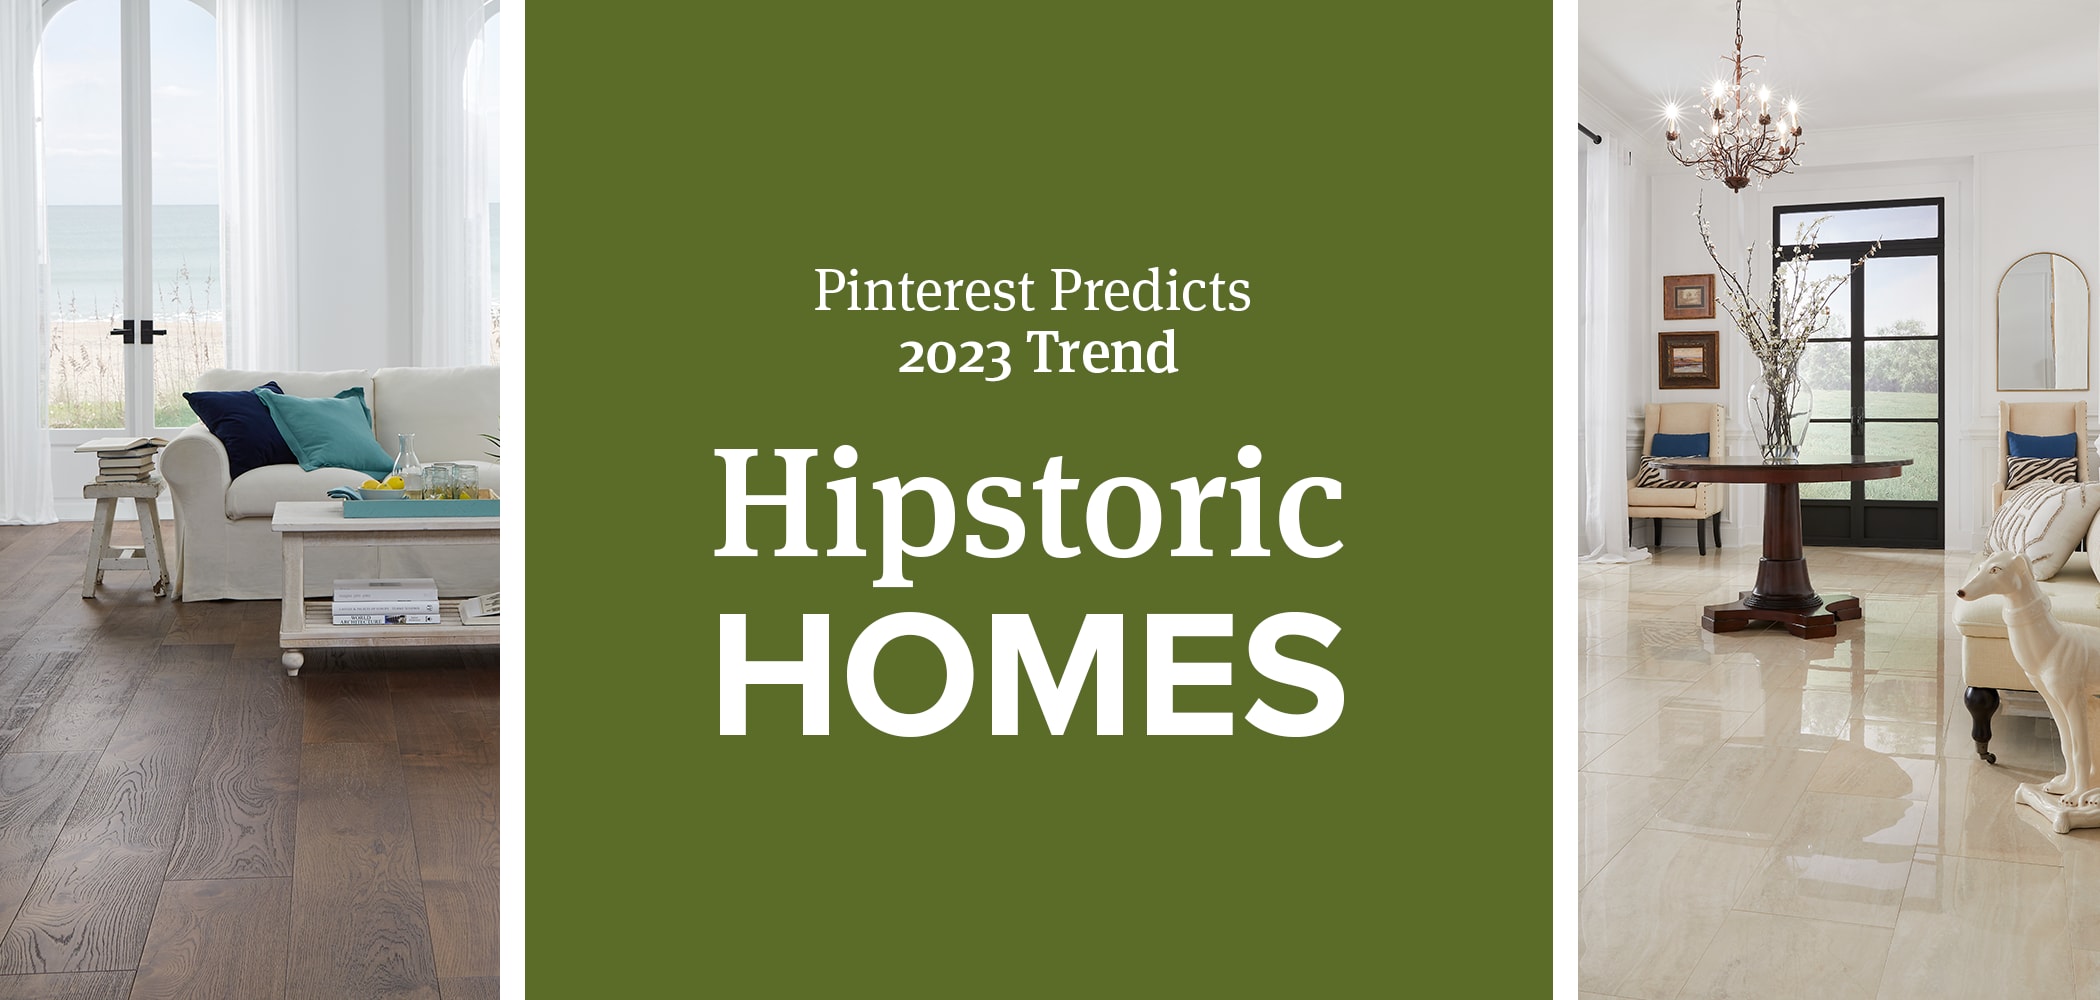 Pinterest Predicts 2023 Trend Hipstoric Homes with dark brown wood floor in seaside living room and polished blonde marble in entryway with dog sculpture